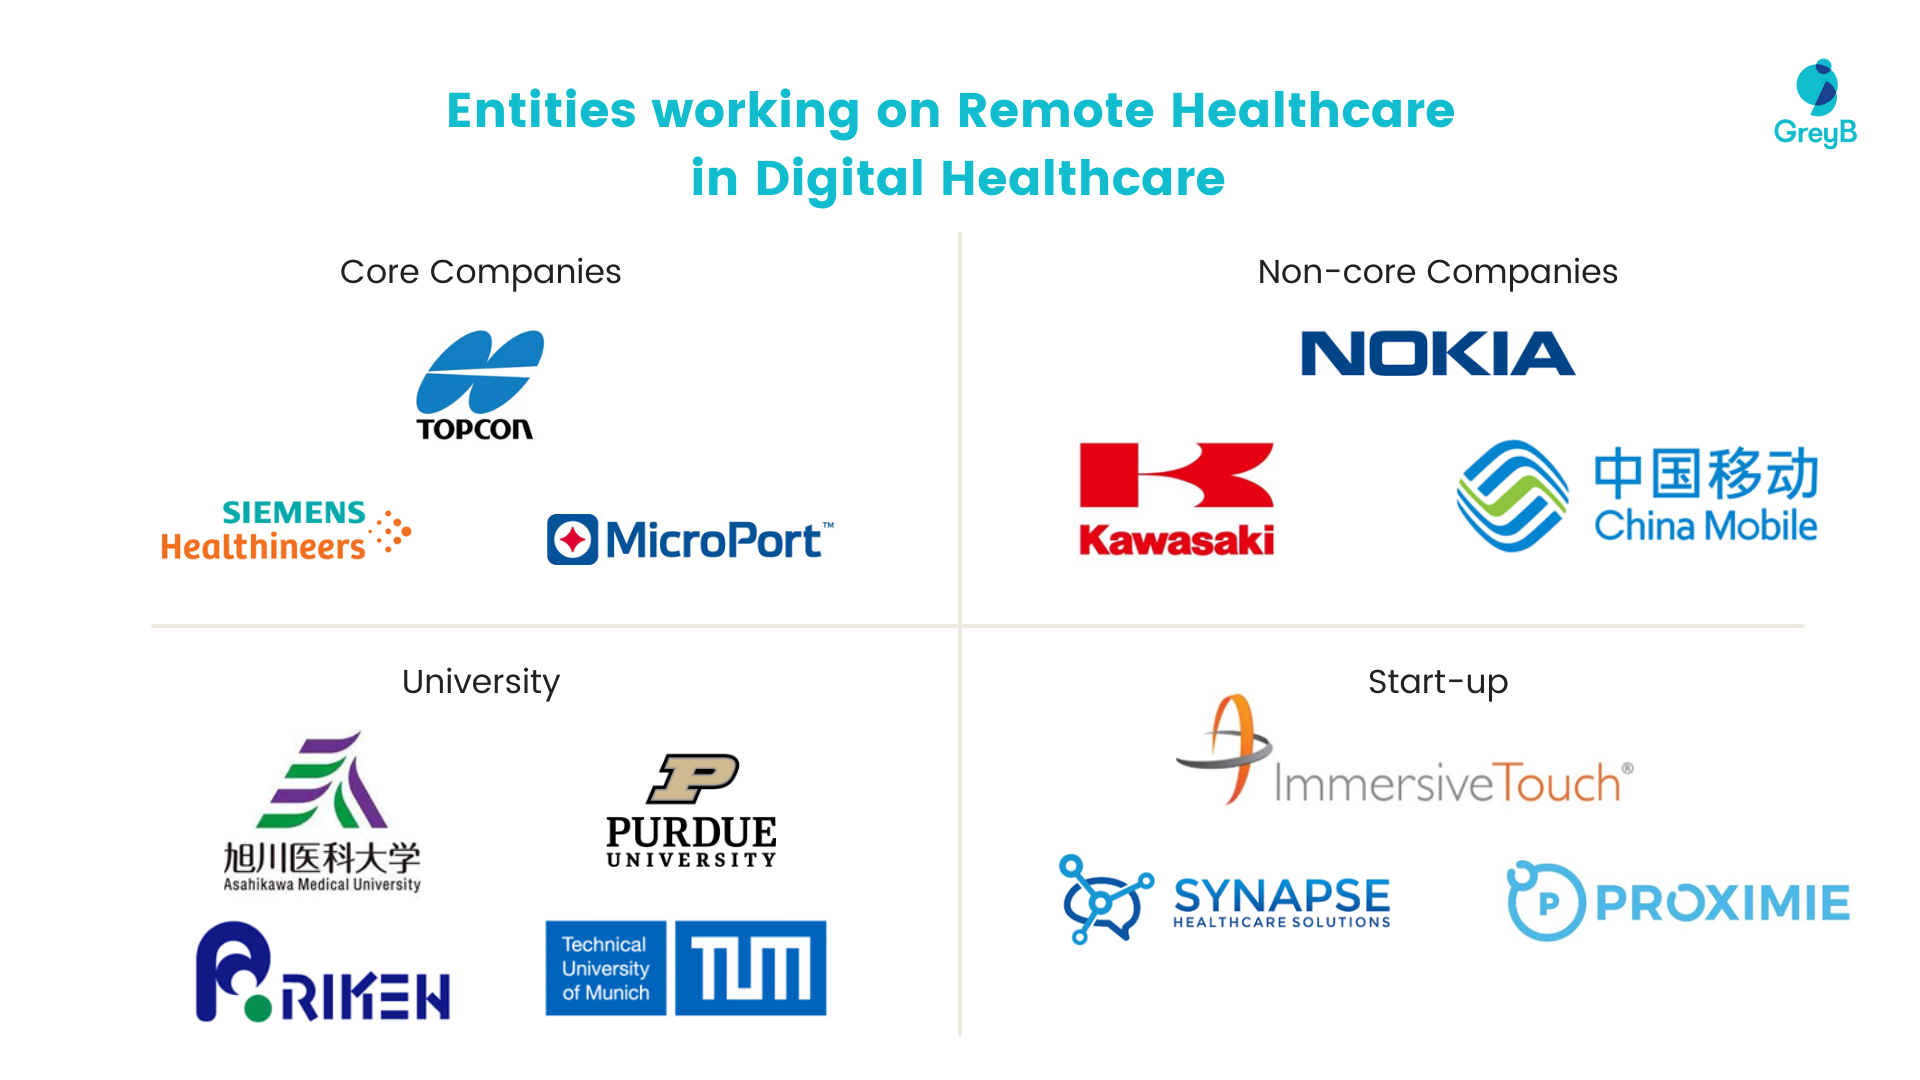 Entities working on Remote Healthcare in Digital Healthcare